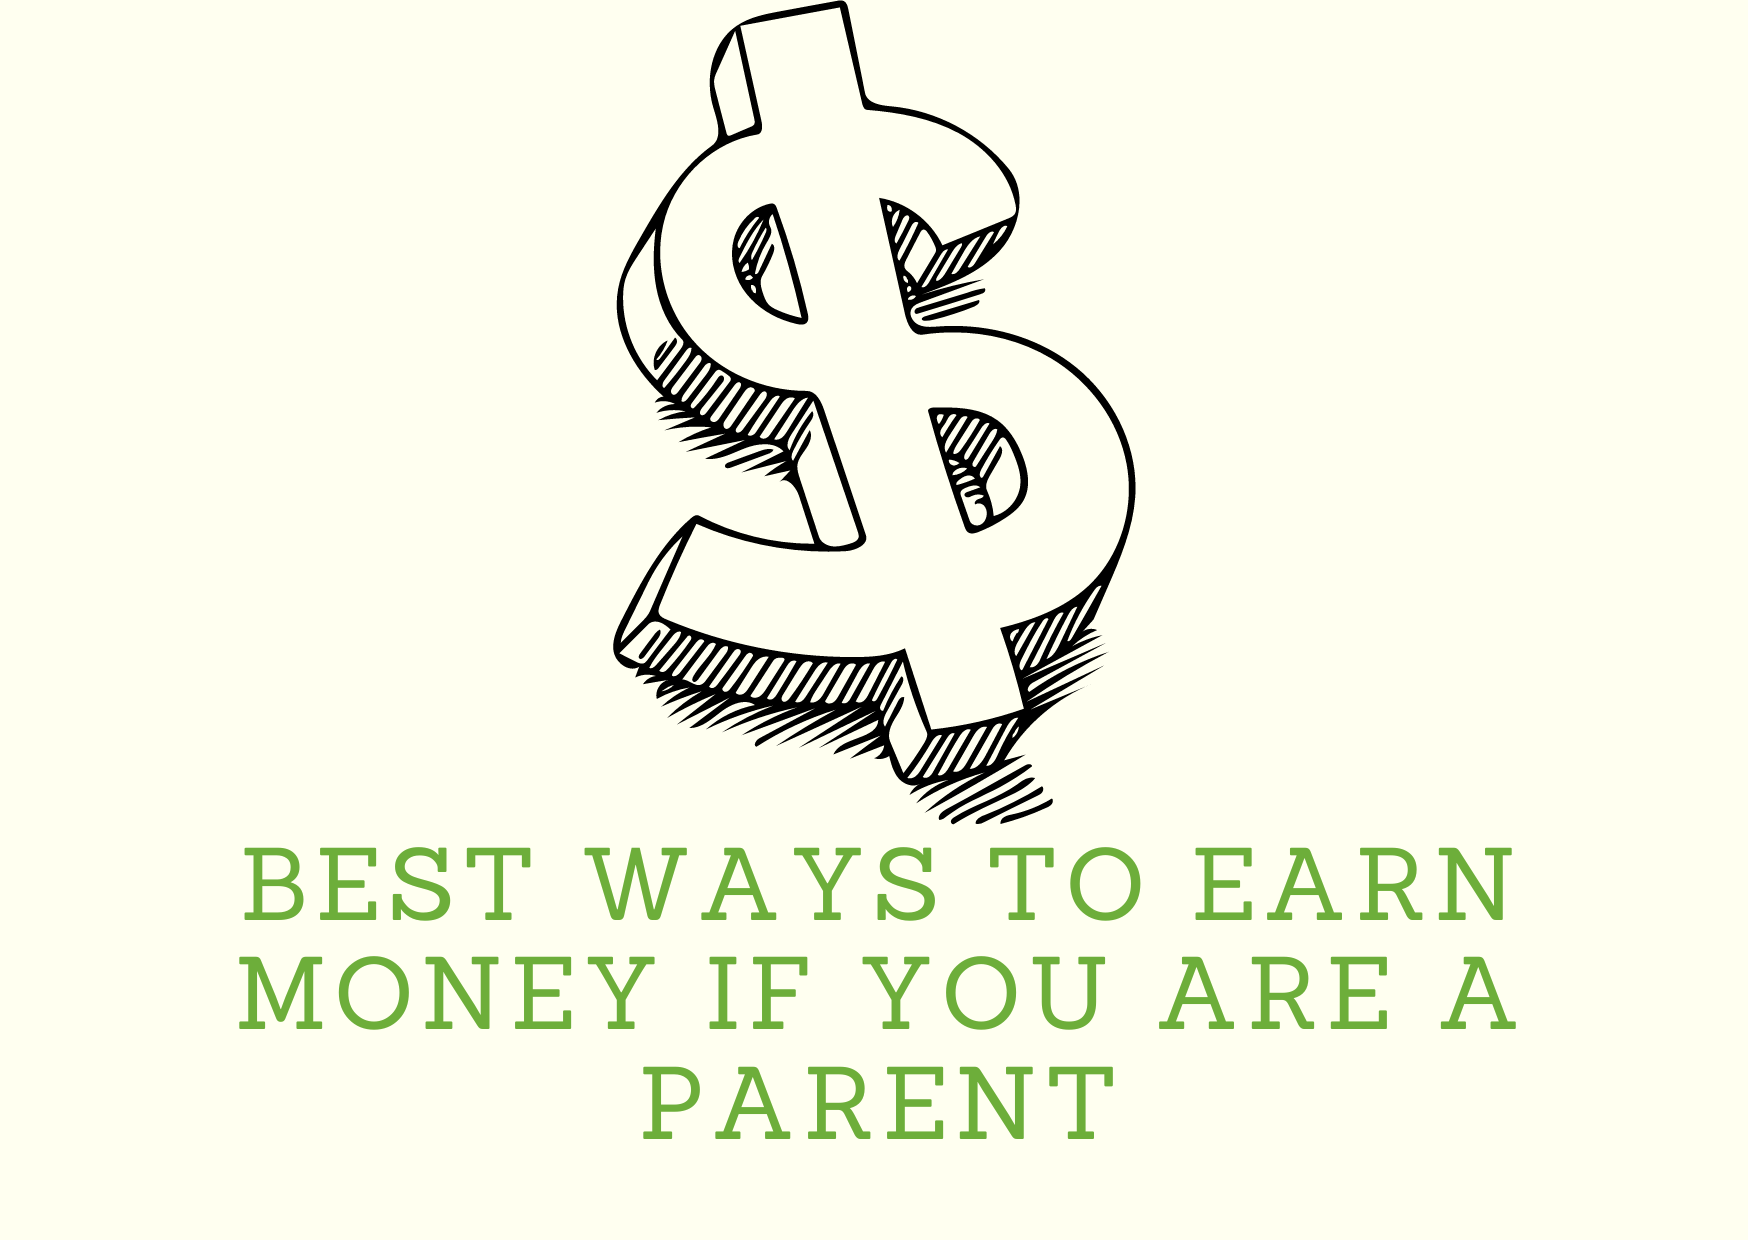 Best Ways to Earn Money if You are a Parent